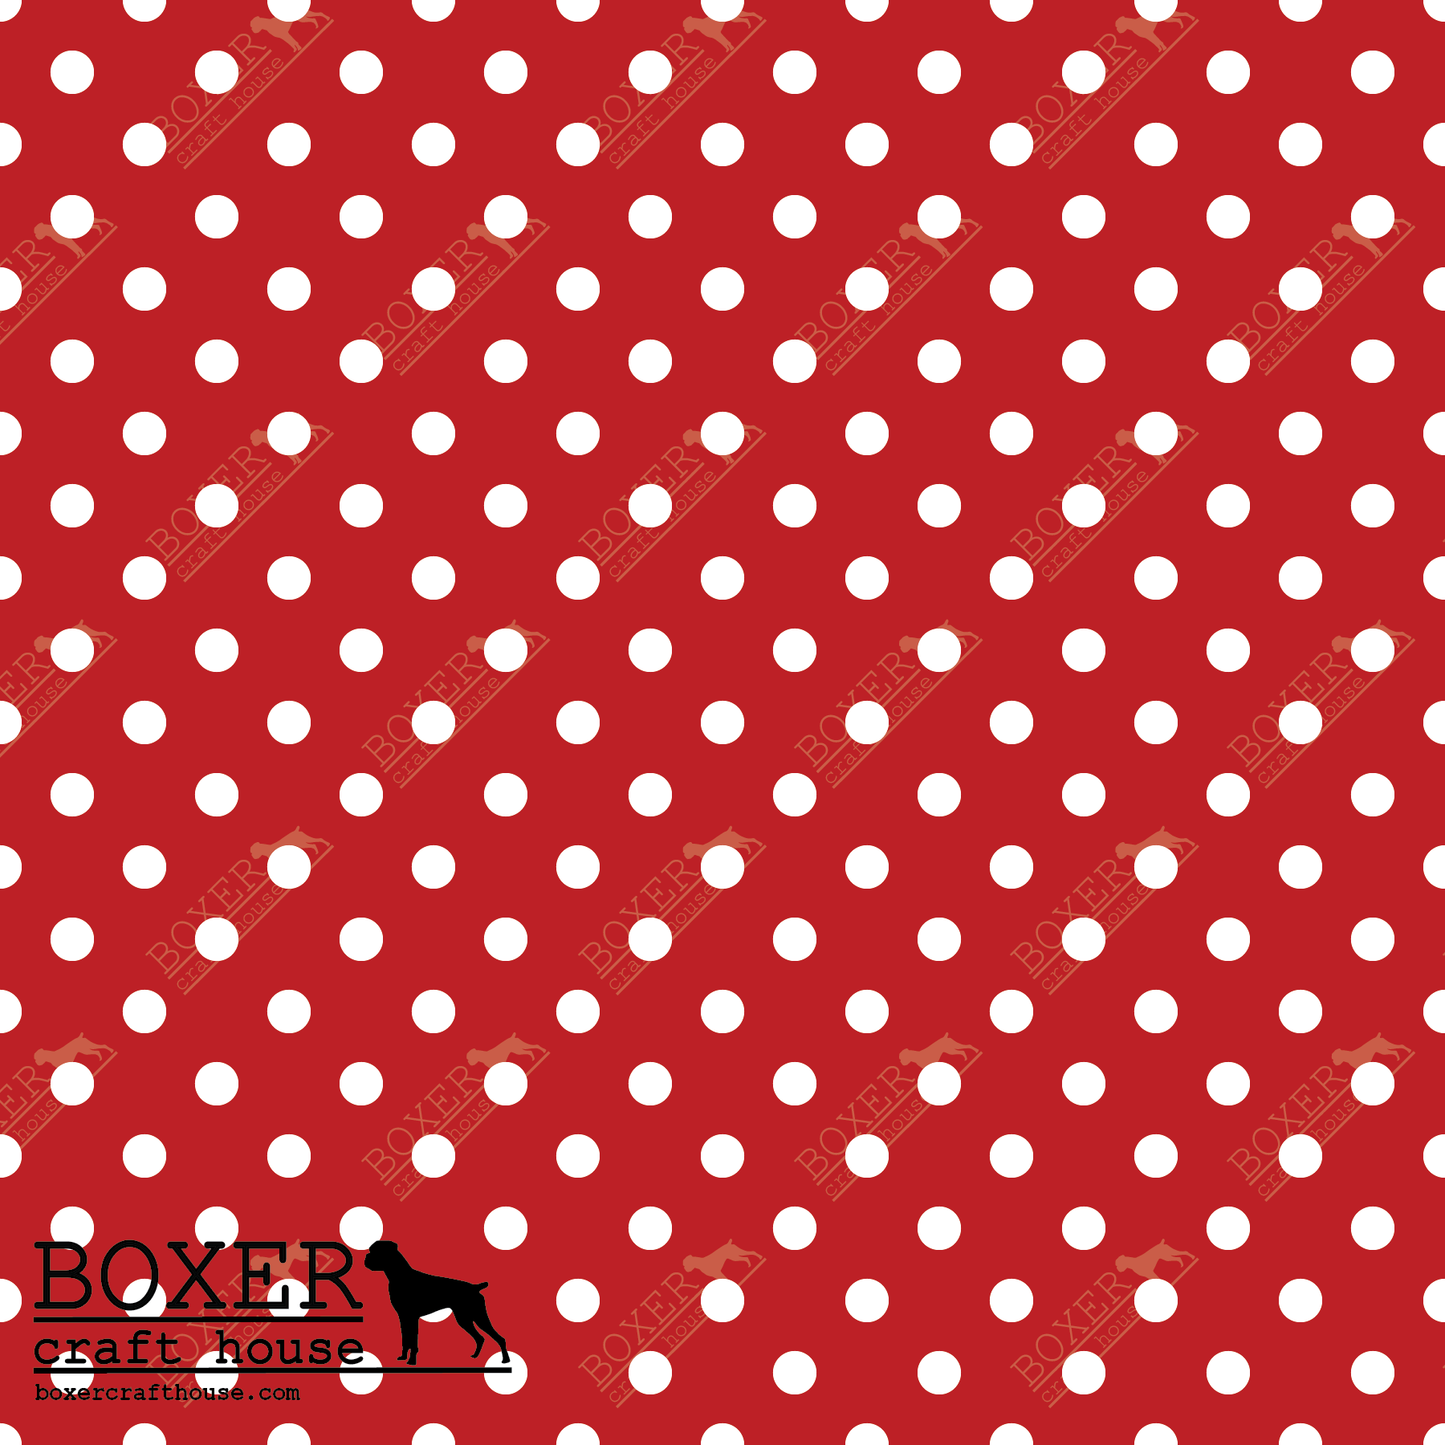 Dots 3/16" - Candy Apple Red